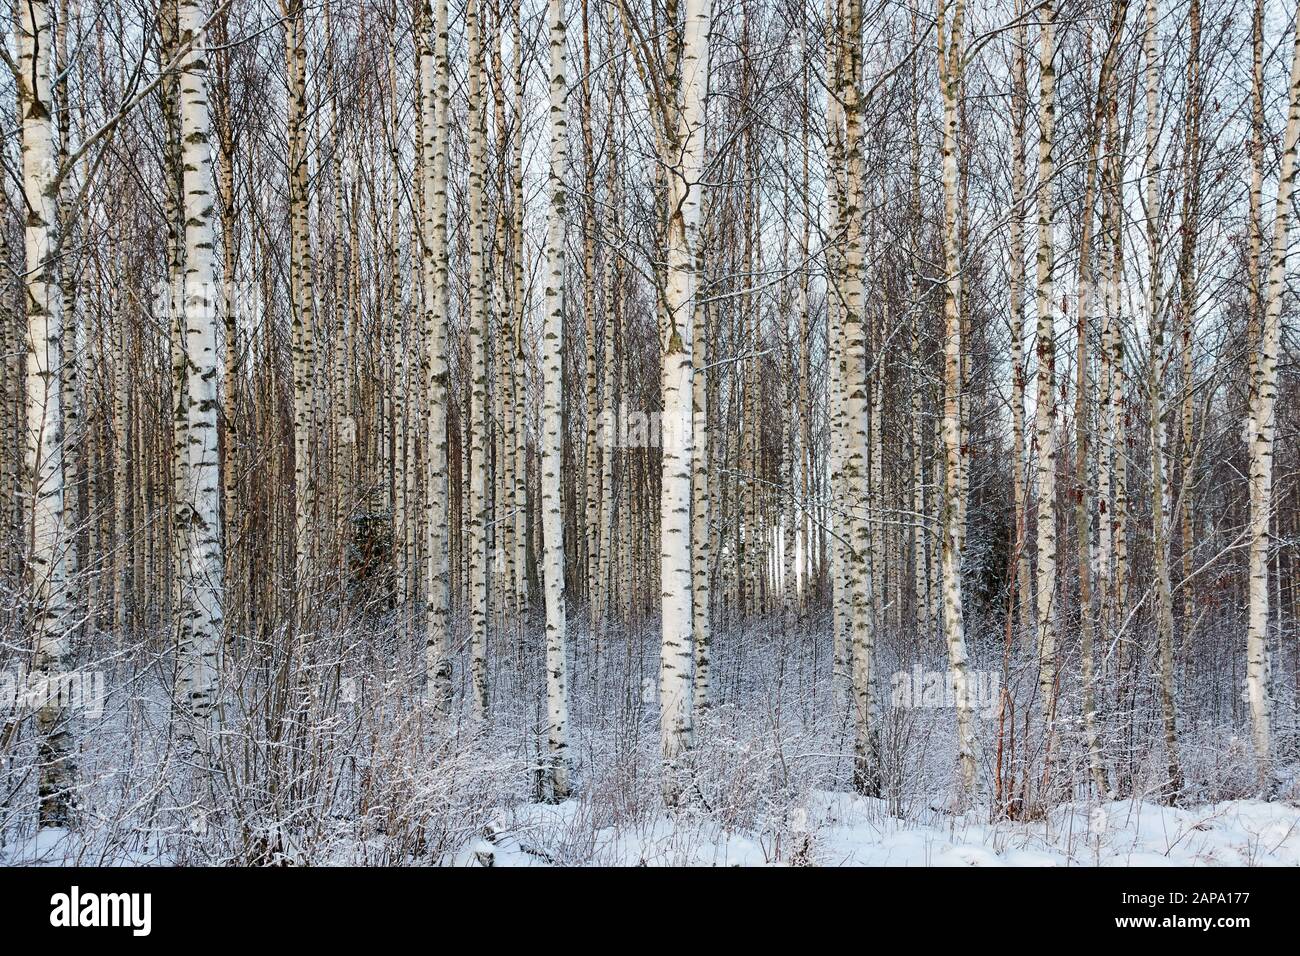 Frozen trees in the finnish forest in the winter. White snow covering the trees. Arctic nature in very cold weather in Finland. Stock Photo